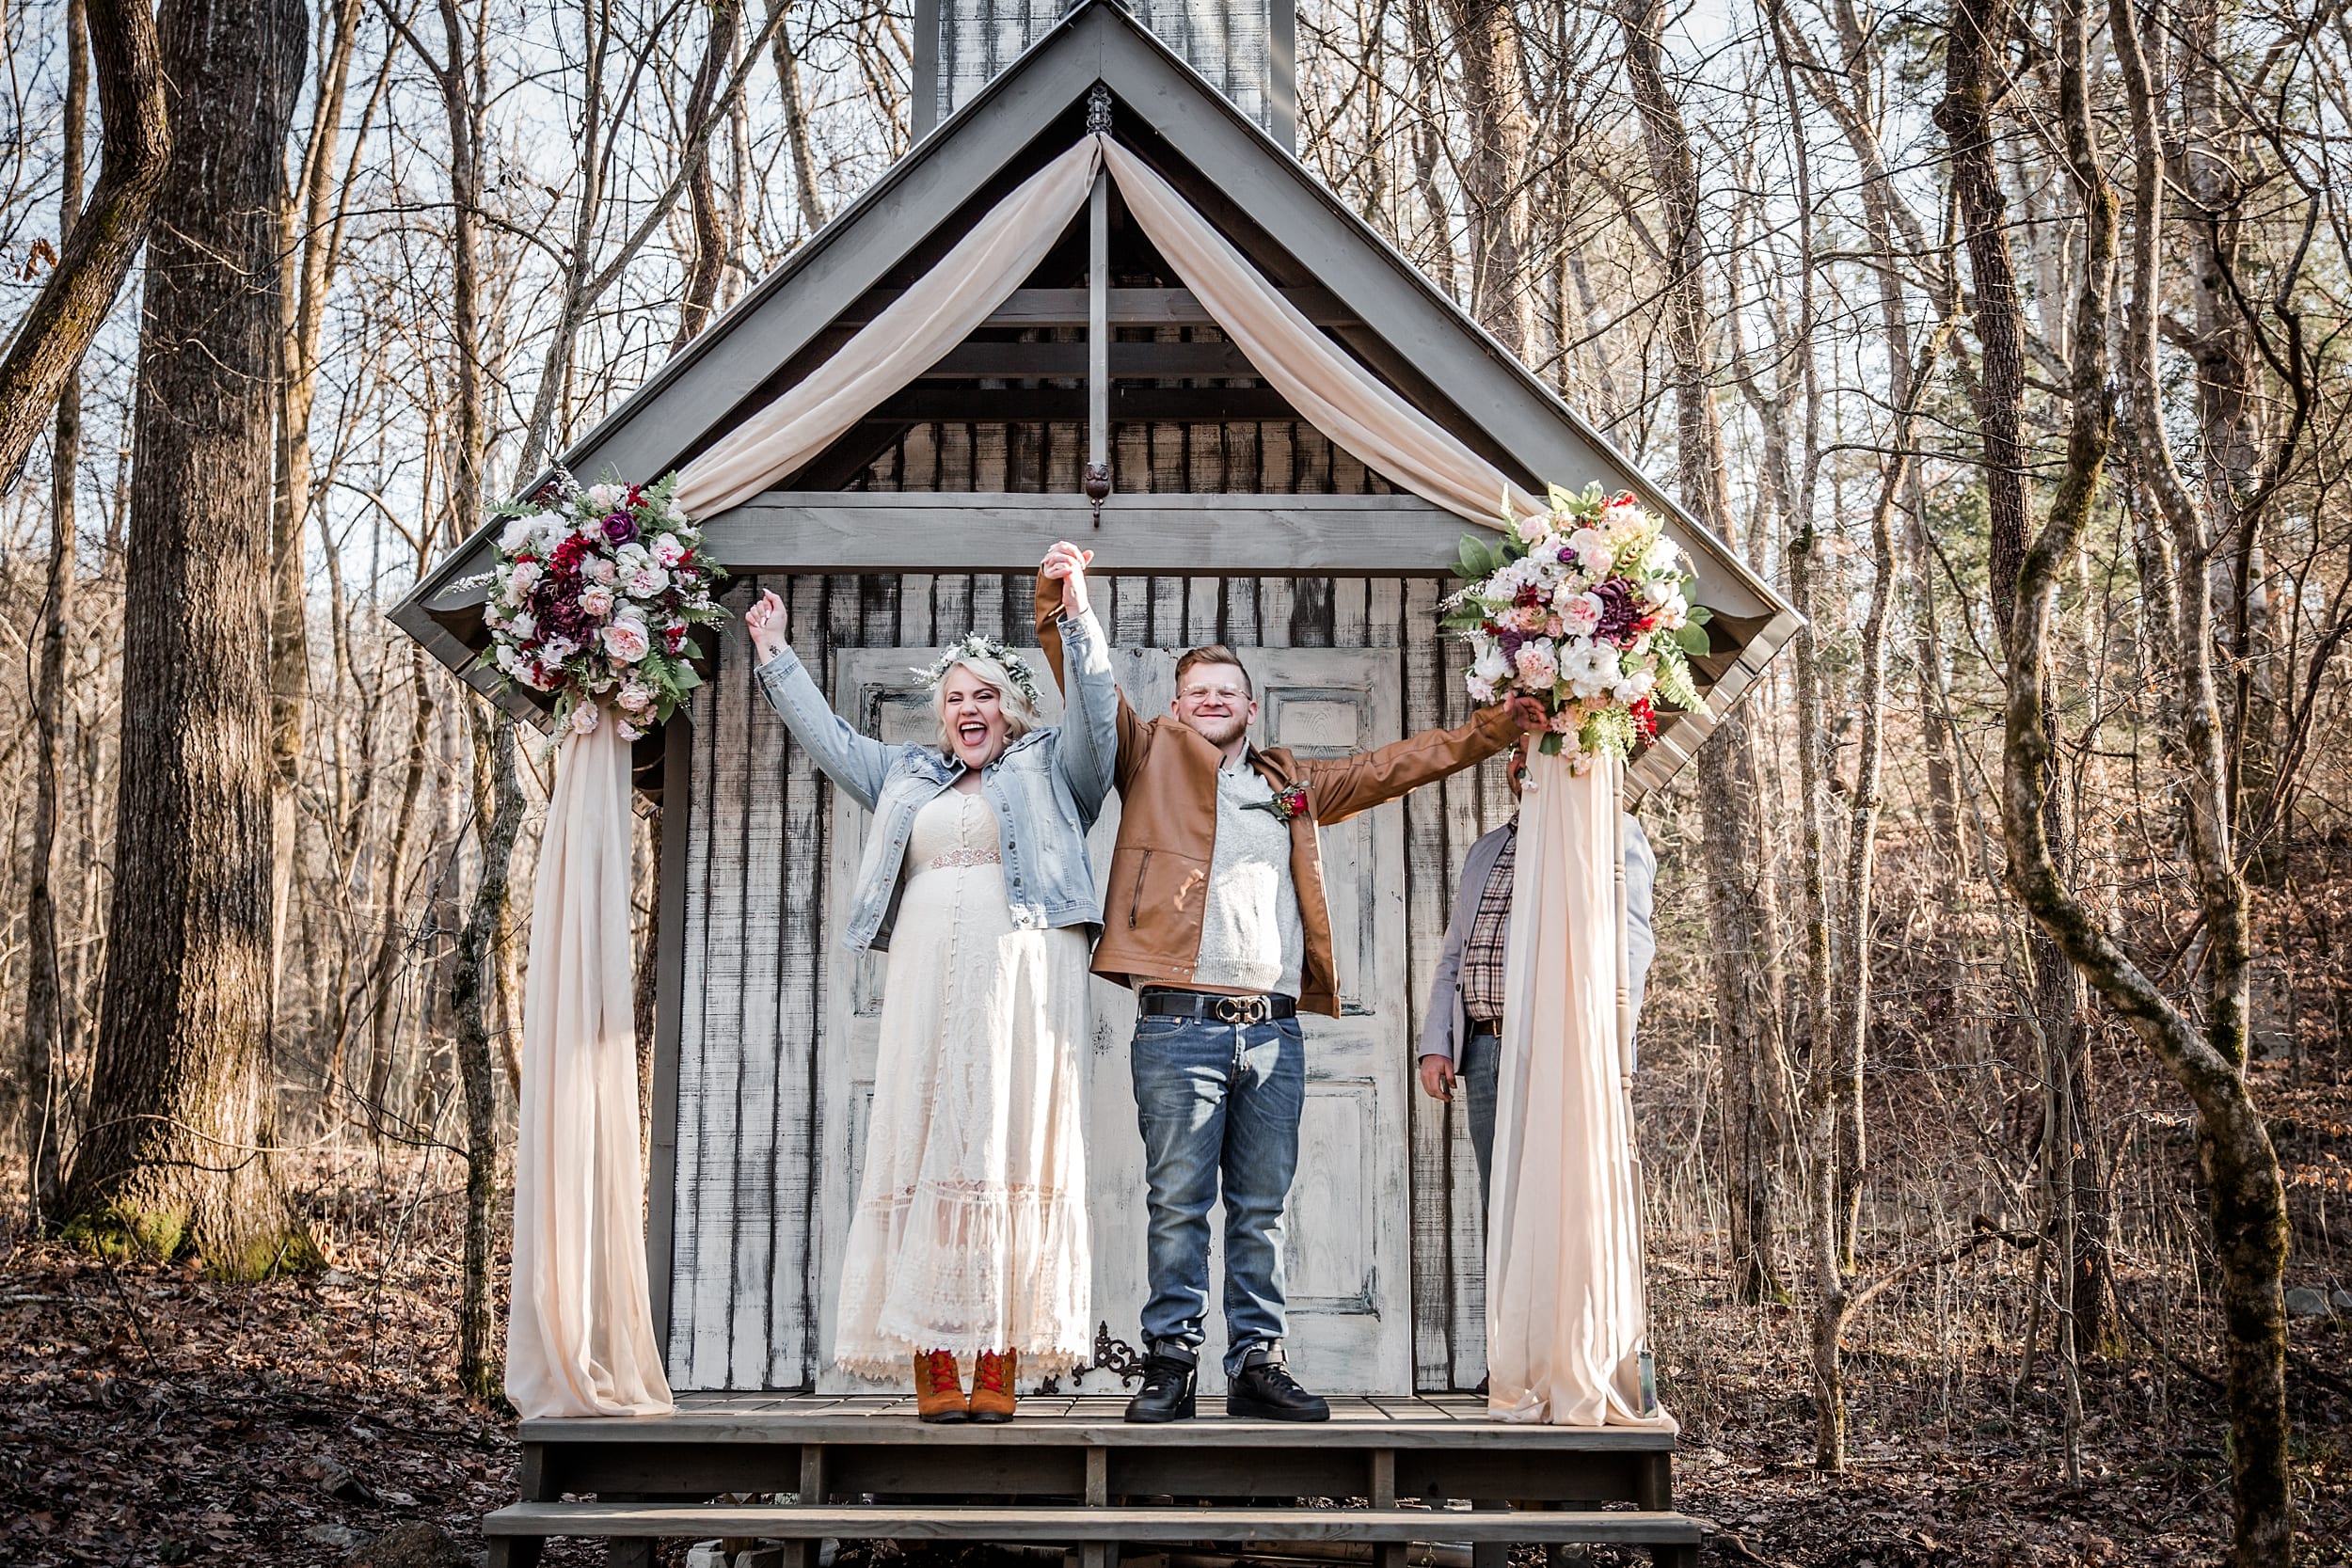 Tying the Knot at Smoky Mountain Wedding Chapels